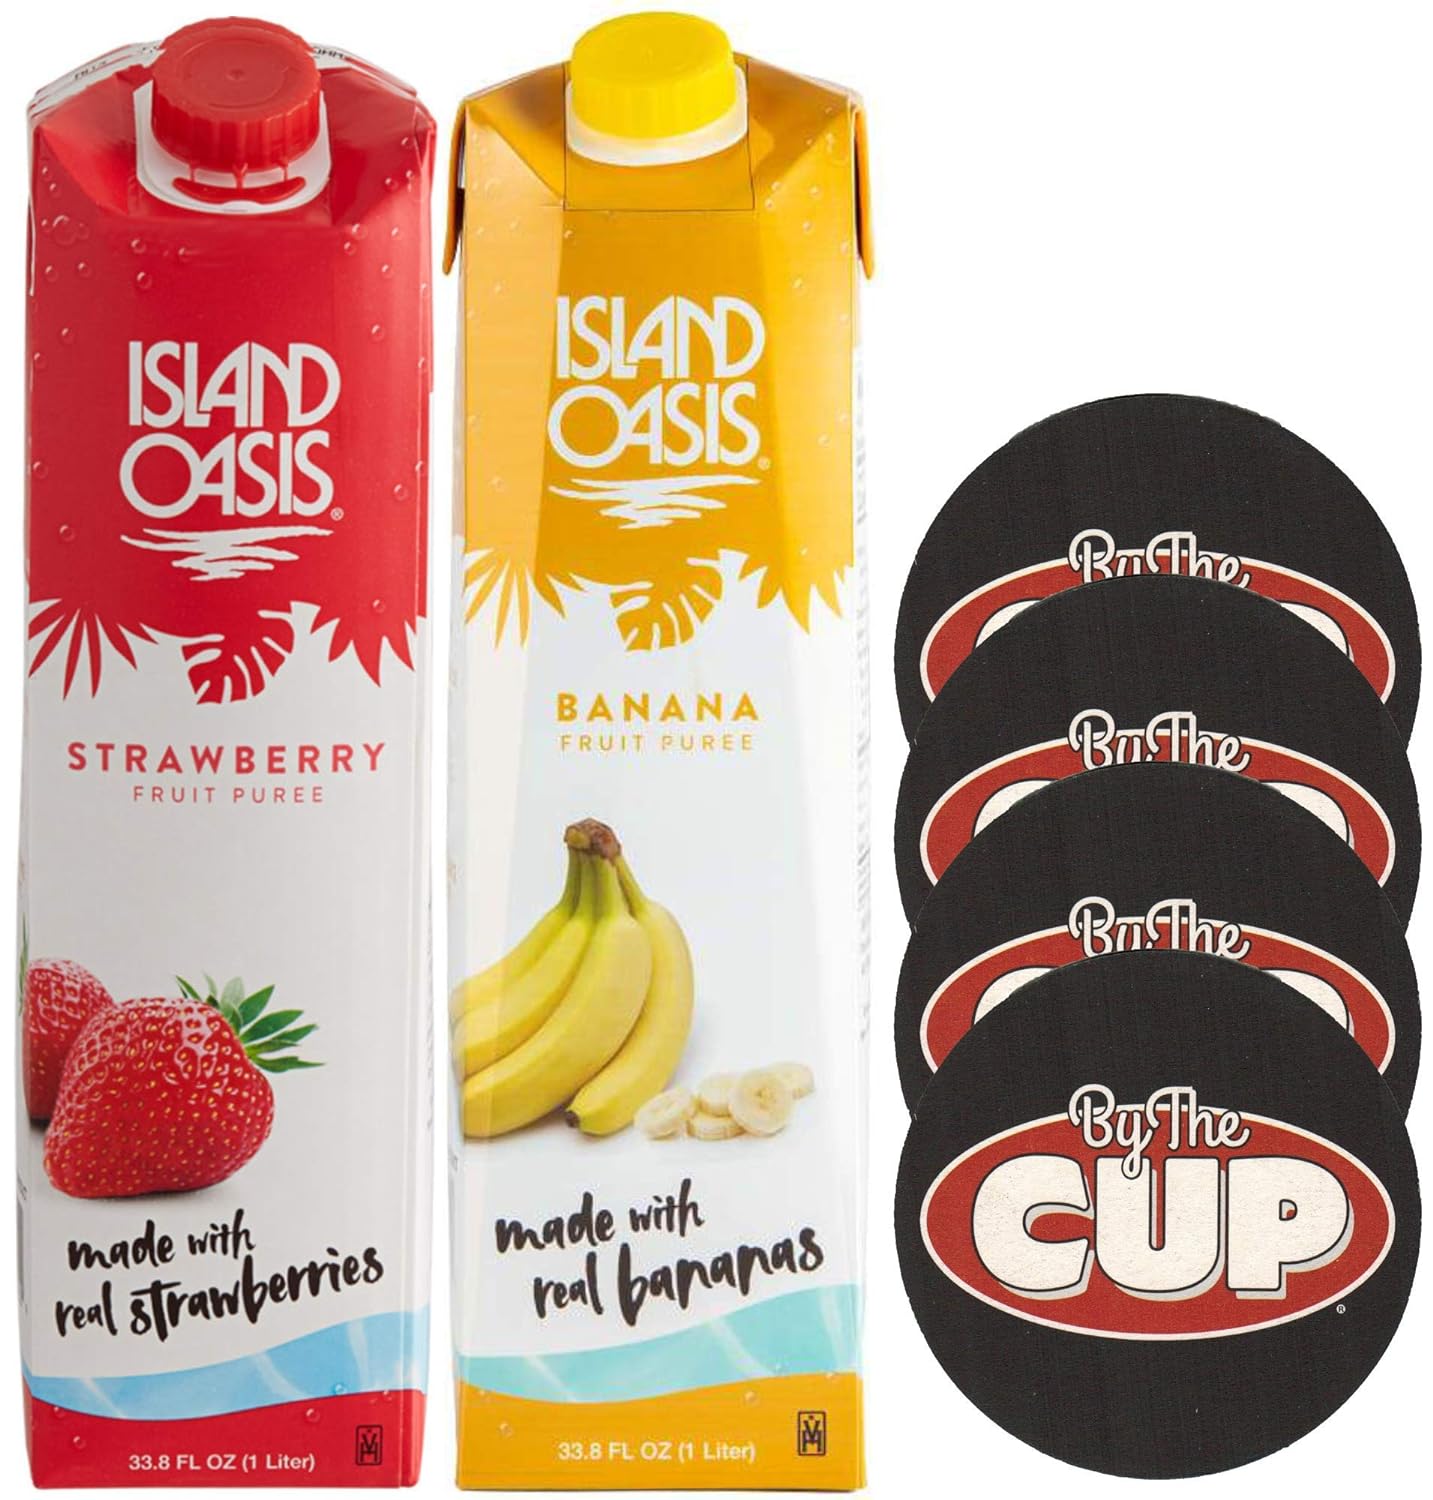 Island Oasis Drink Mix Variety, Strawberry and Banana 1 Liter Each, with Set of By The Cup Coasters